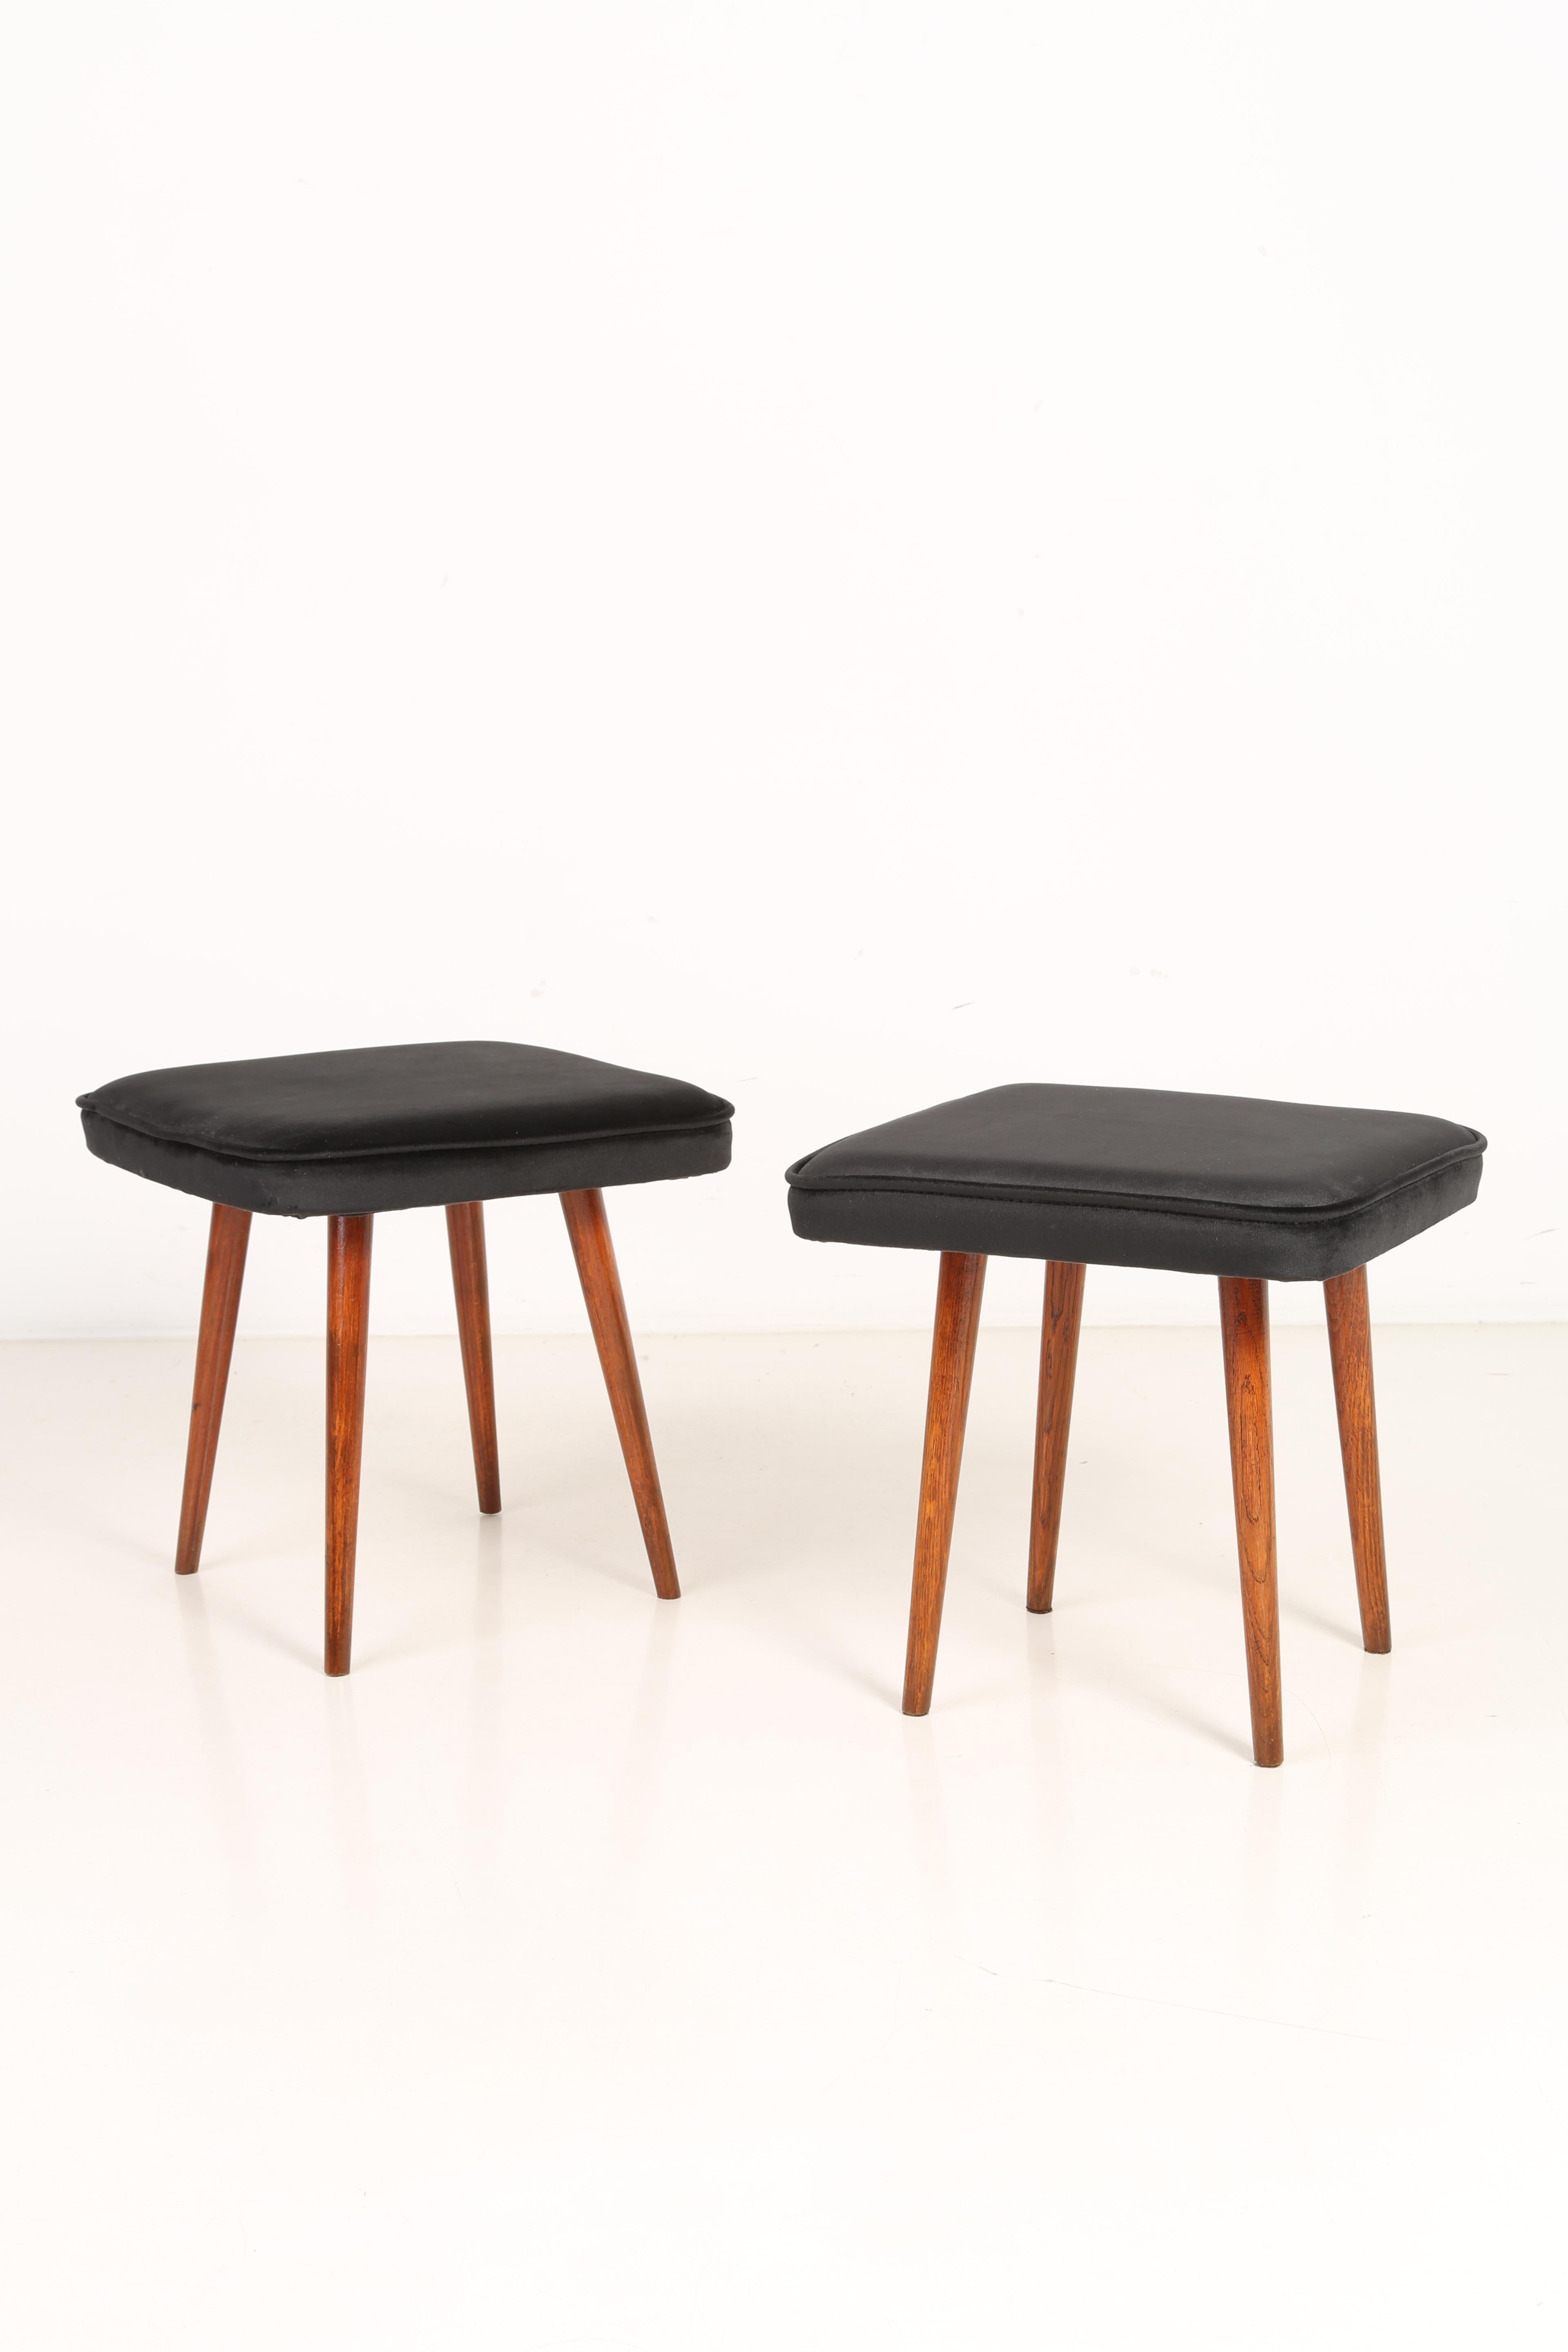 Stool from the turn of the 1960s and 1970s. Beautiful black velvet upholstery. The stool consists of an upholstered part, a seat and wooden legs narrowing downwards, characteristic of the 1960s style. We can prepare this pair also in another color